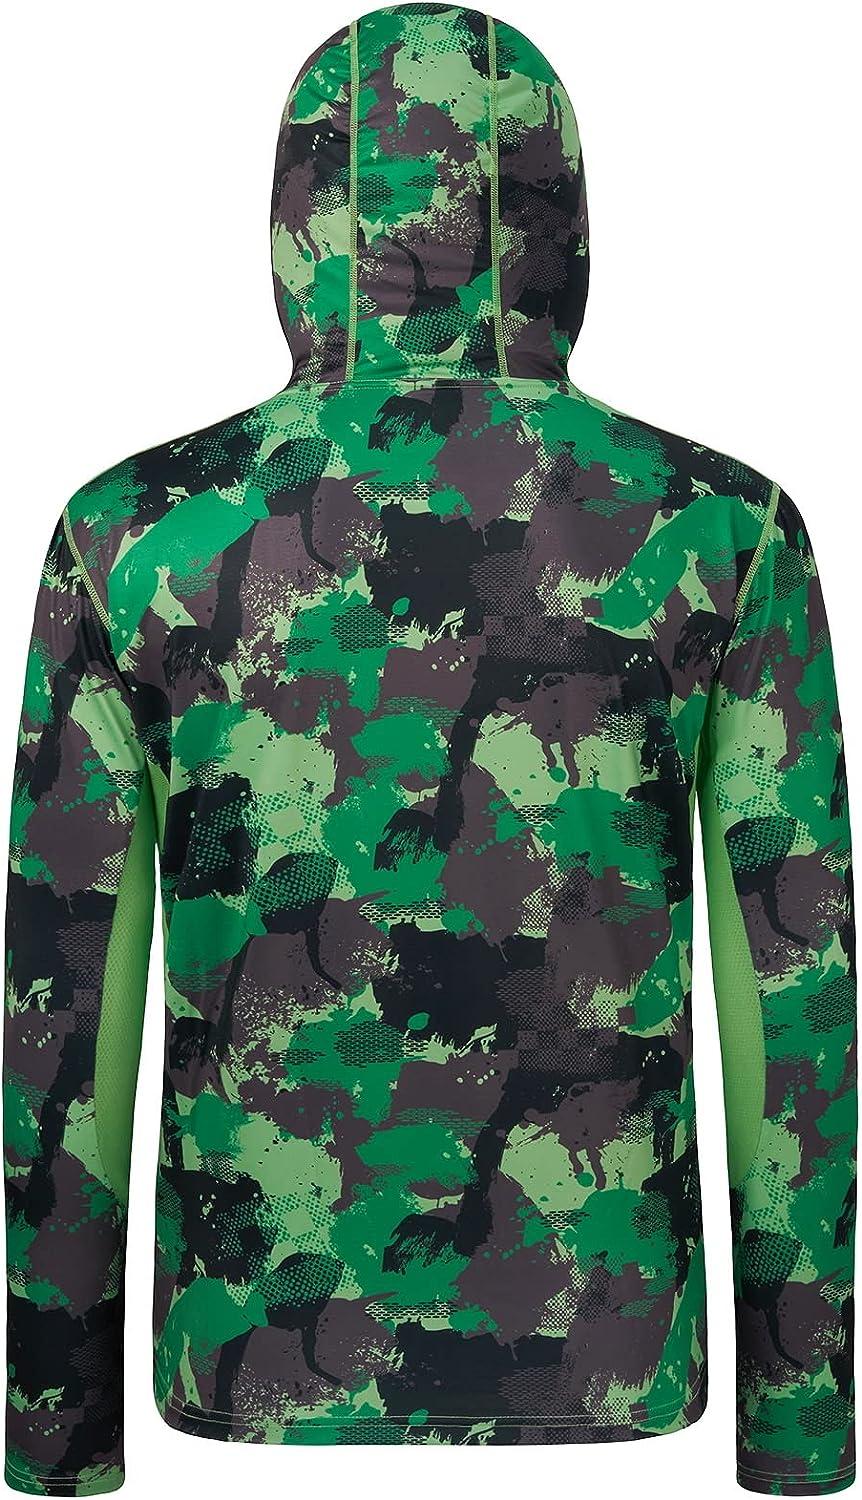 Bassdash Men's Camouflage Hooded Long-Sleeved Shirt With High